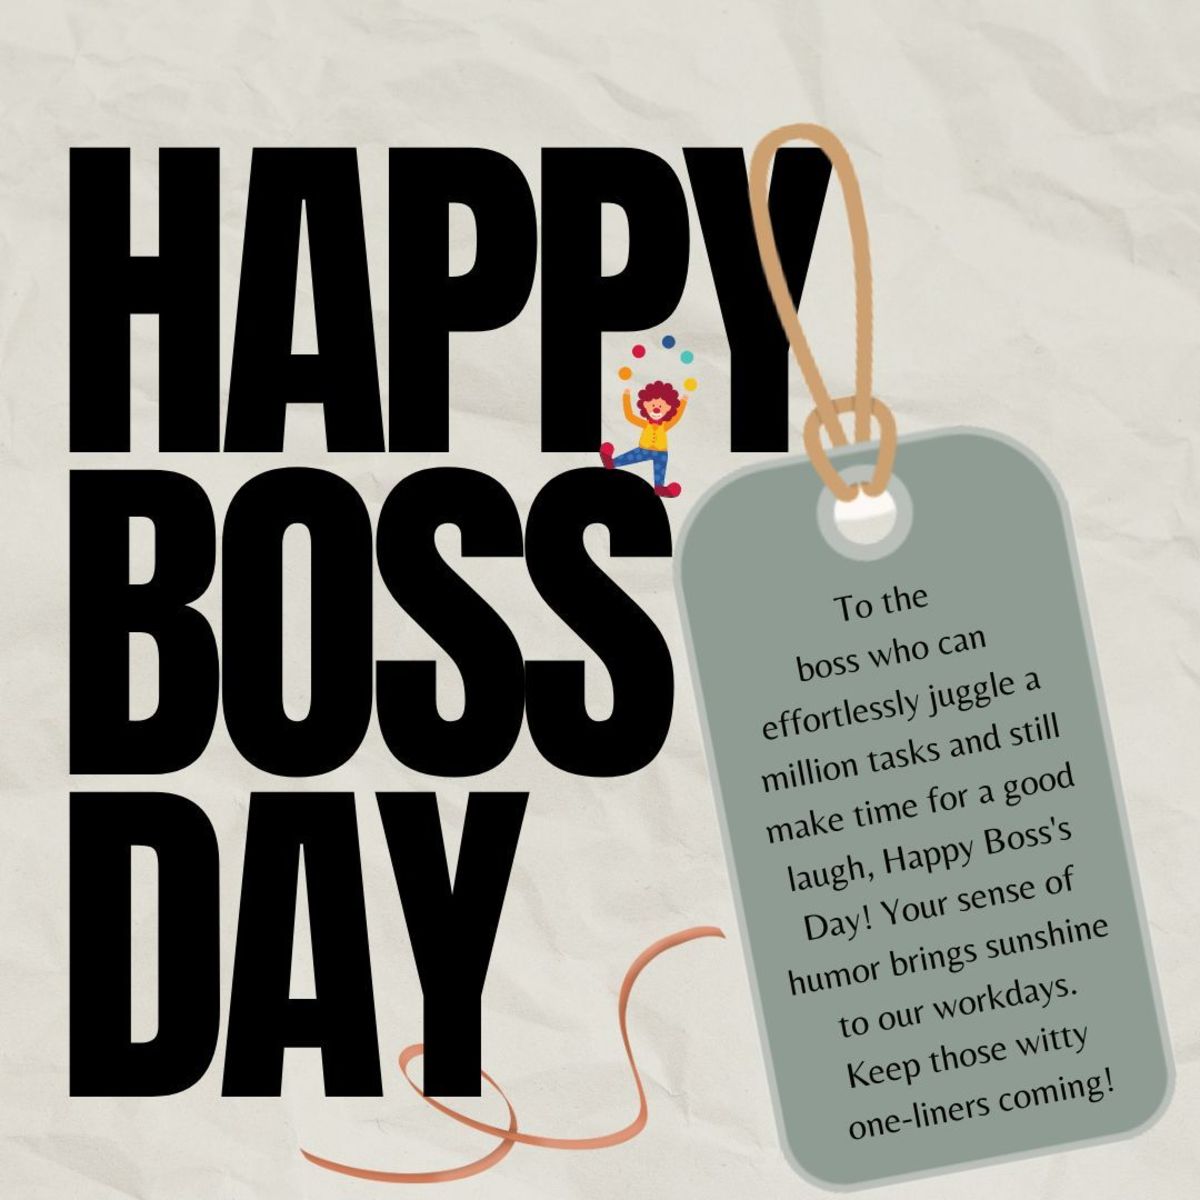 Best Happy Boss Day Message, Even If You Dislike Your Boss HubPages